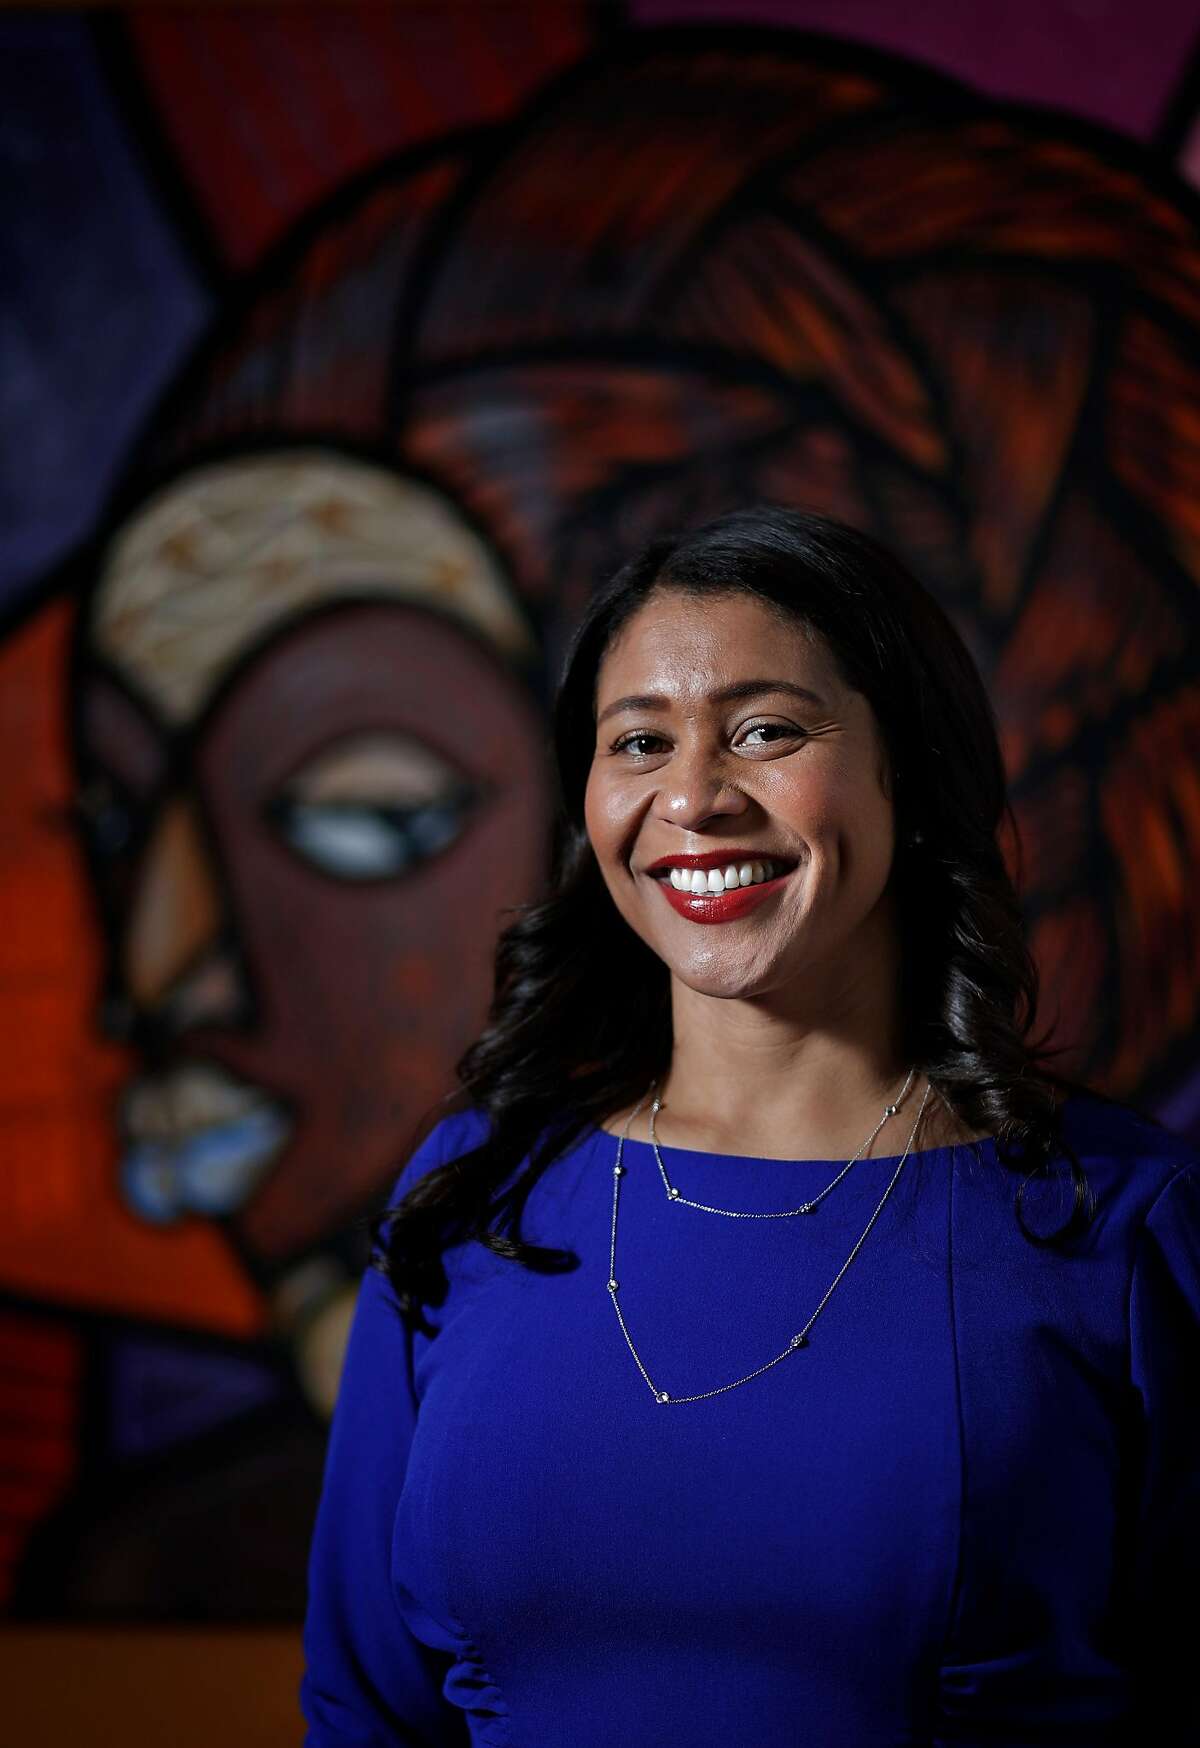 San Francisco Board of Supervisors President and mayoral candidate London Breed, visits the African American Art & Culture Complex in San Francisco, Calif., on Monday, March 12, 2018. As a child, Breed grew up in the Western Addition neighborhood and spent a great deal of time at the complex, eventually becoming the executive director and overseeing its major renovation.